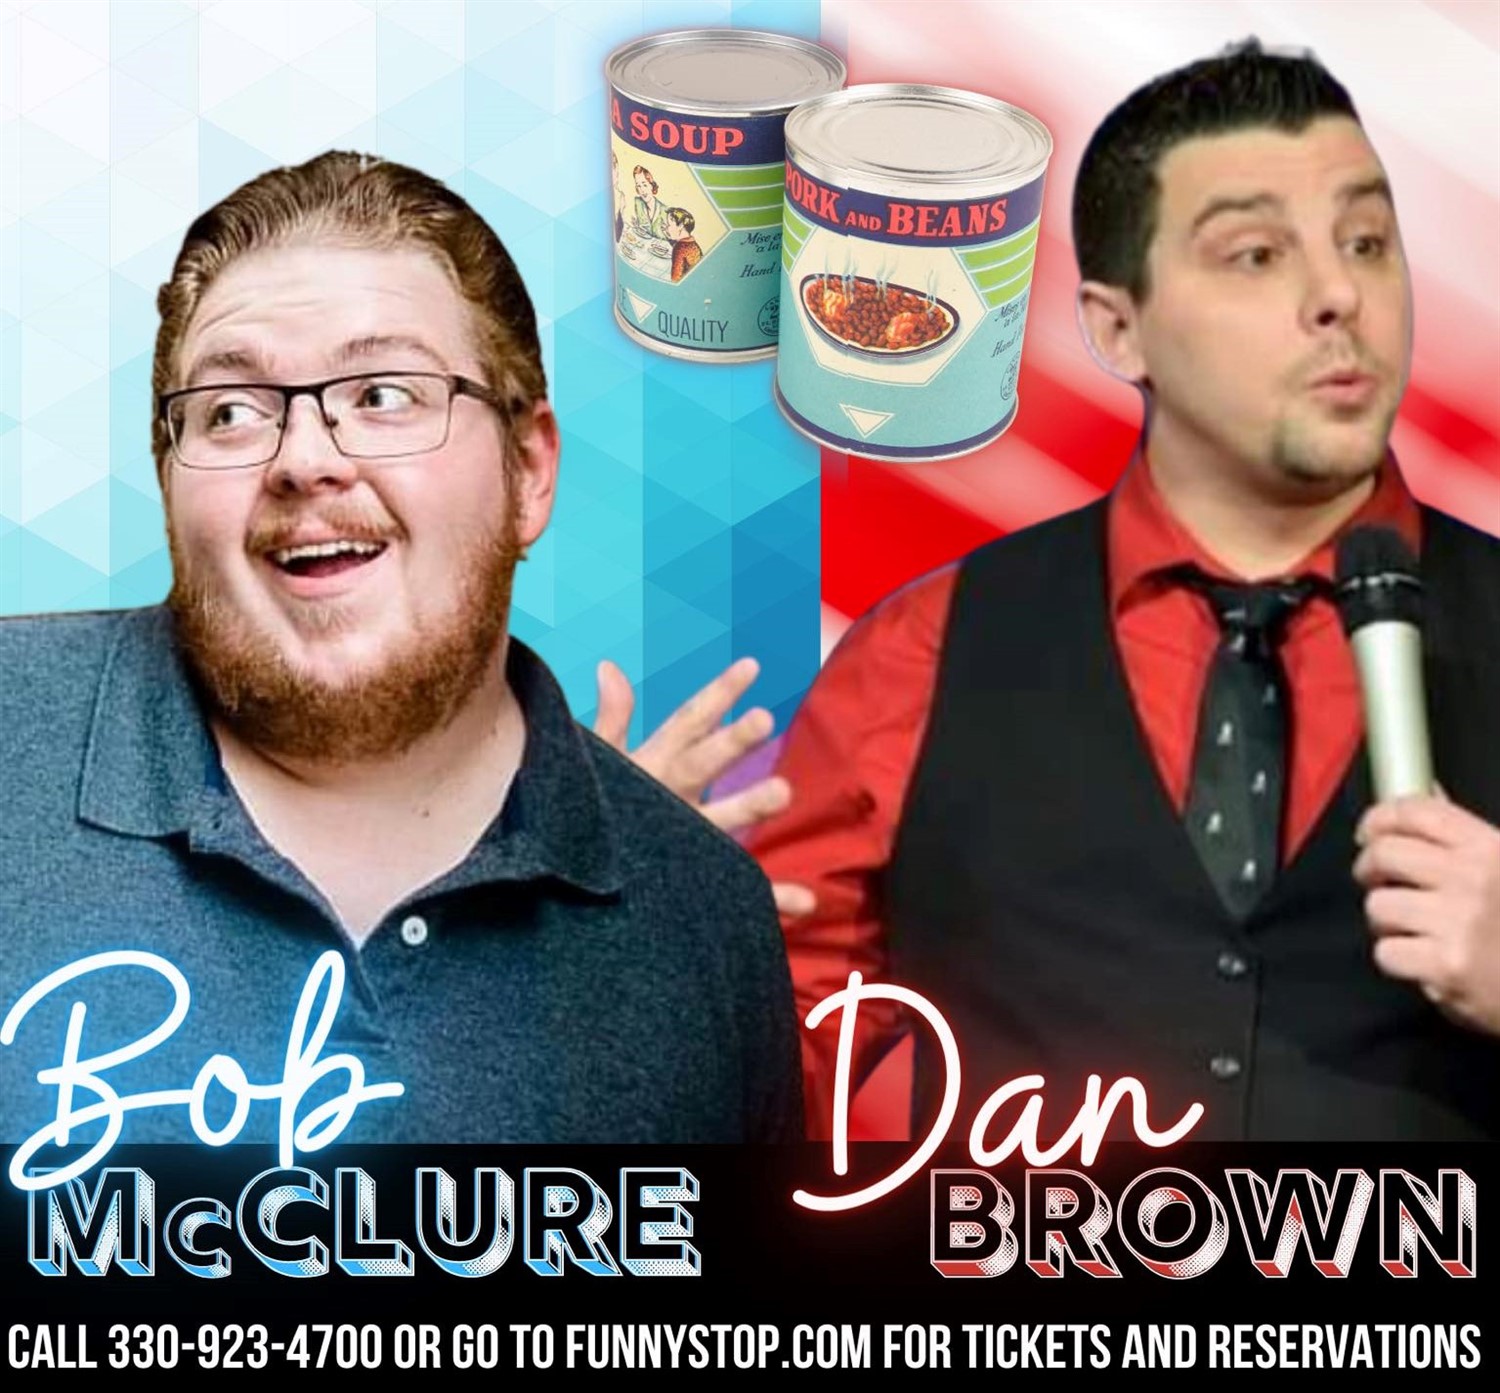 Bob McClure and Dan Brown 7:20pm show Funny Stop Comedy Club on Dec 16, 19:20@Funny Stop Comedy Club - Buy tickets and Get information on Funny Stop funnystop.online